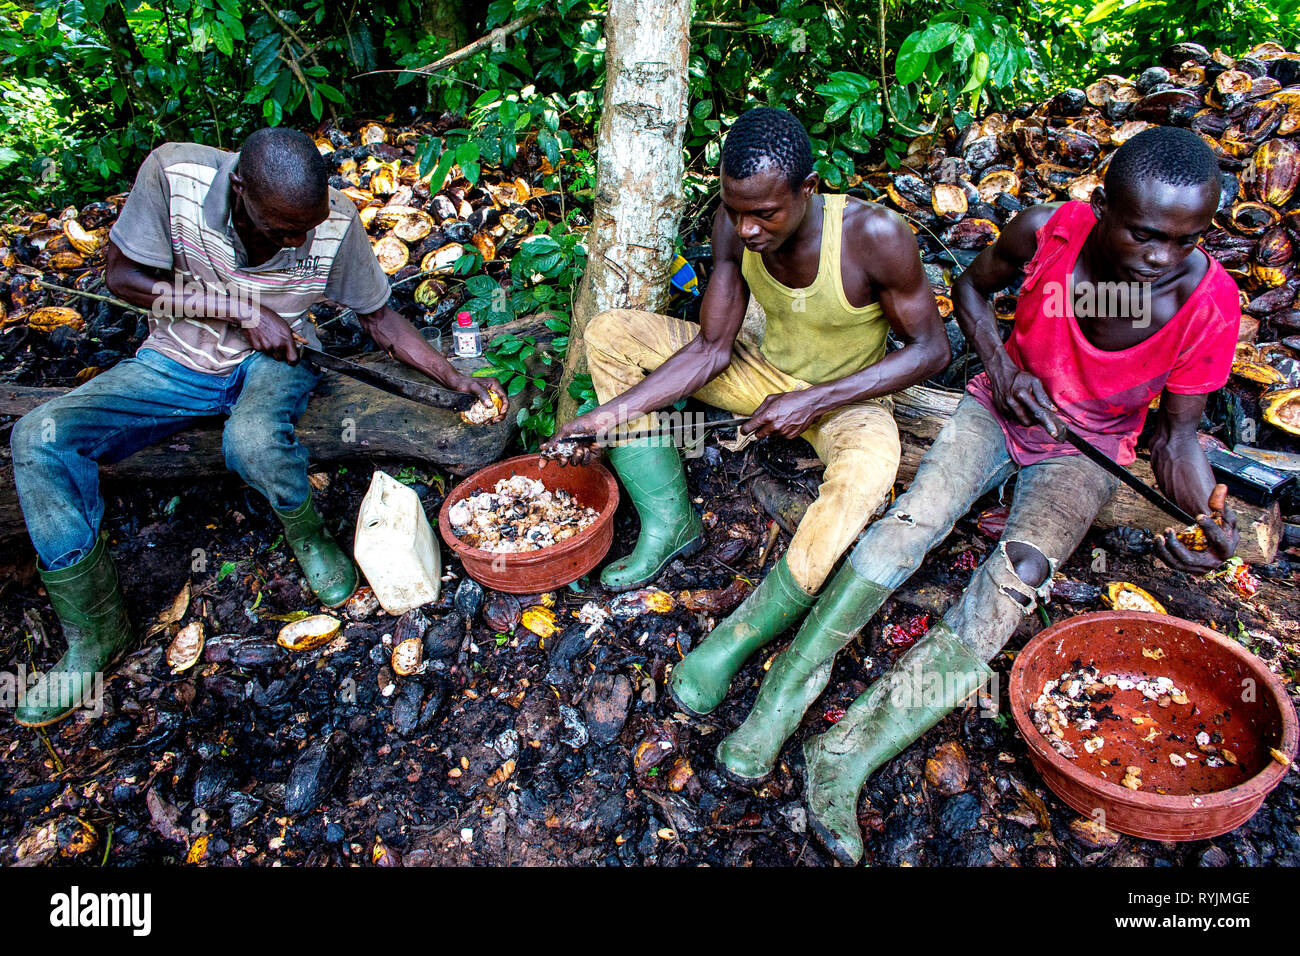 Cocoa planters opening pods near Agboville, Ivory Coast. Stock Photo